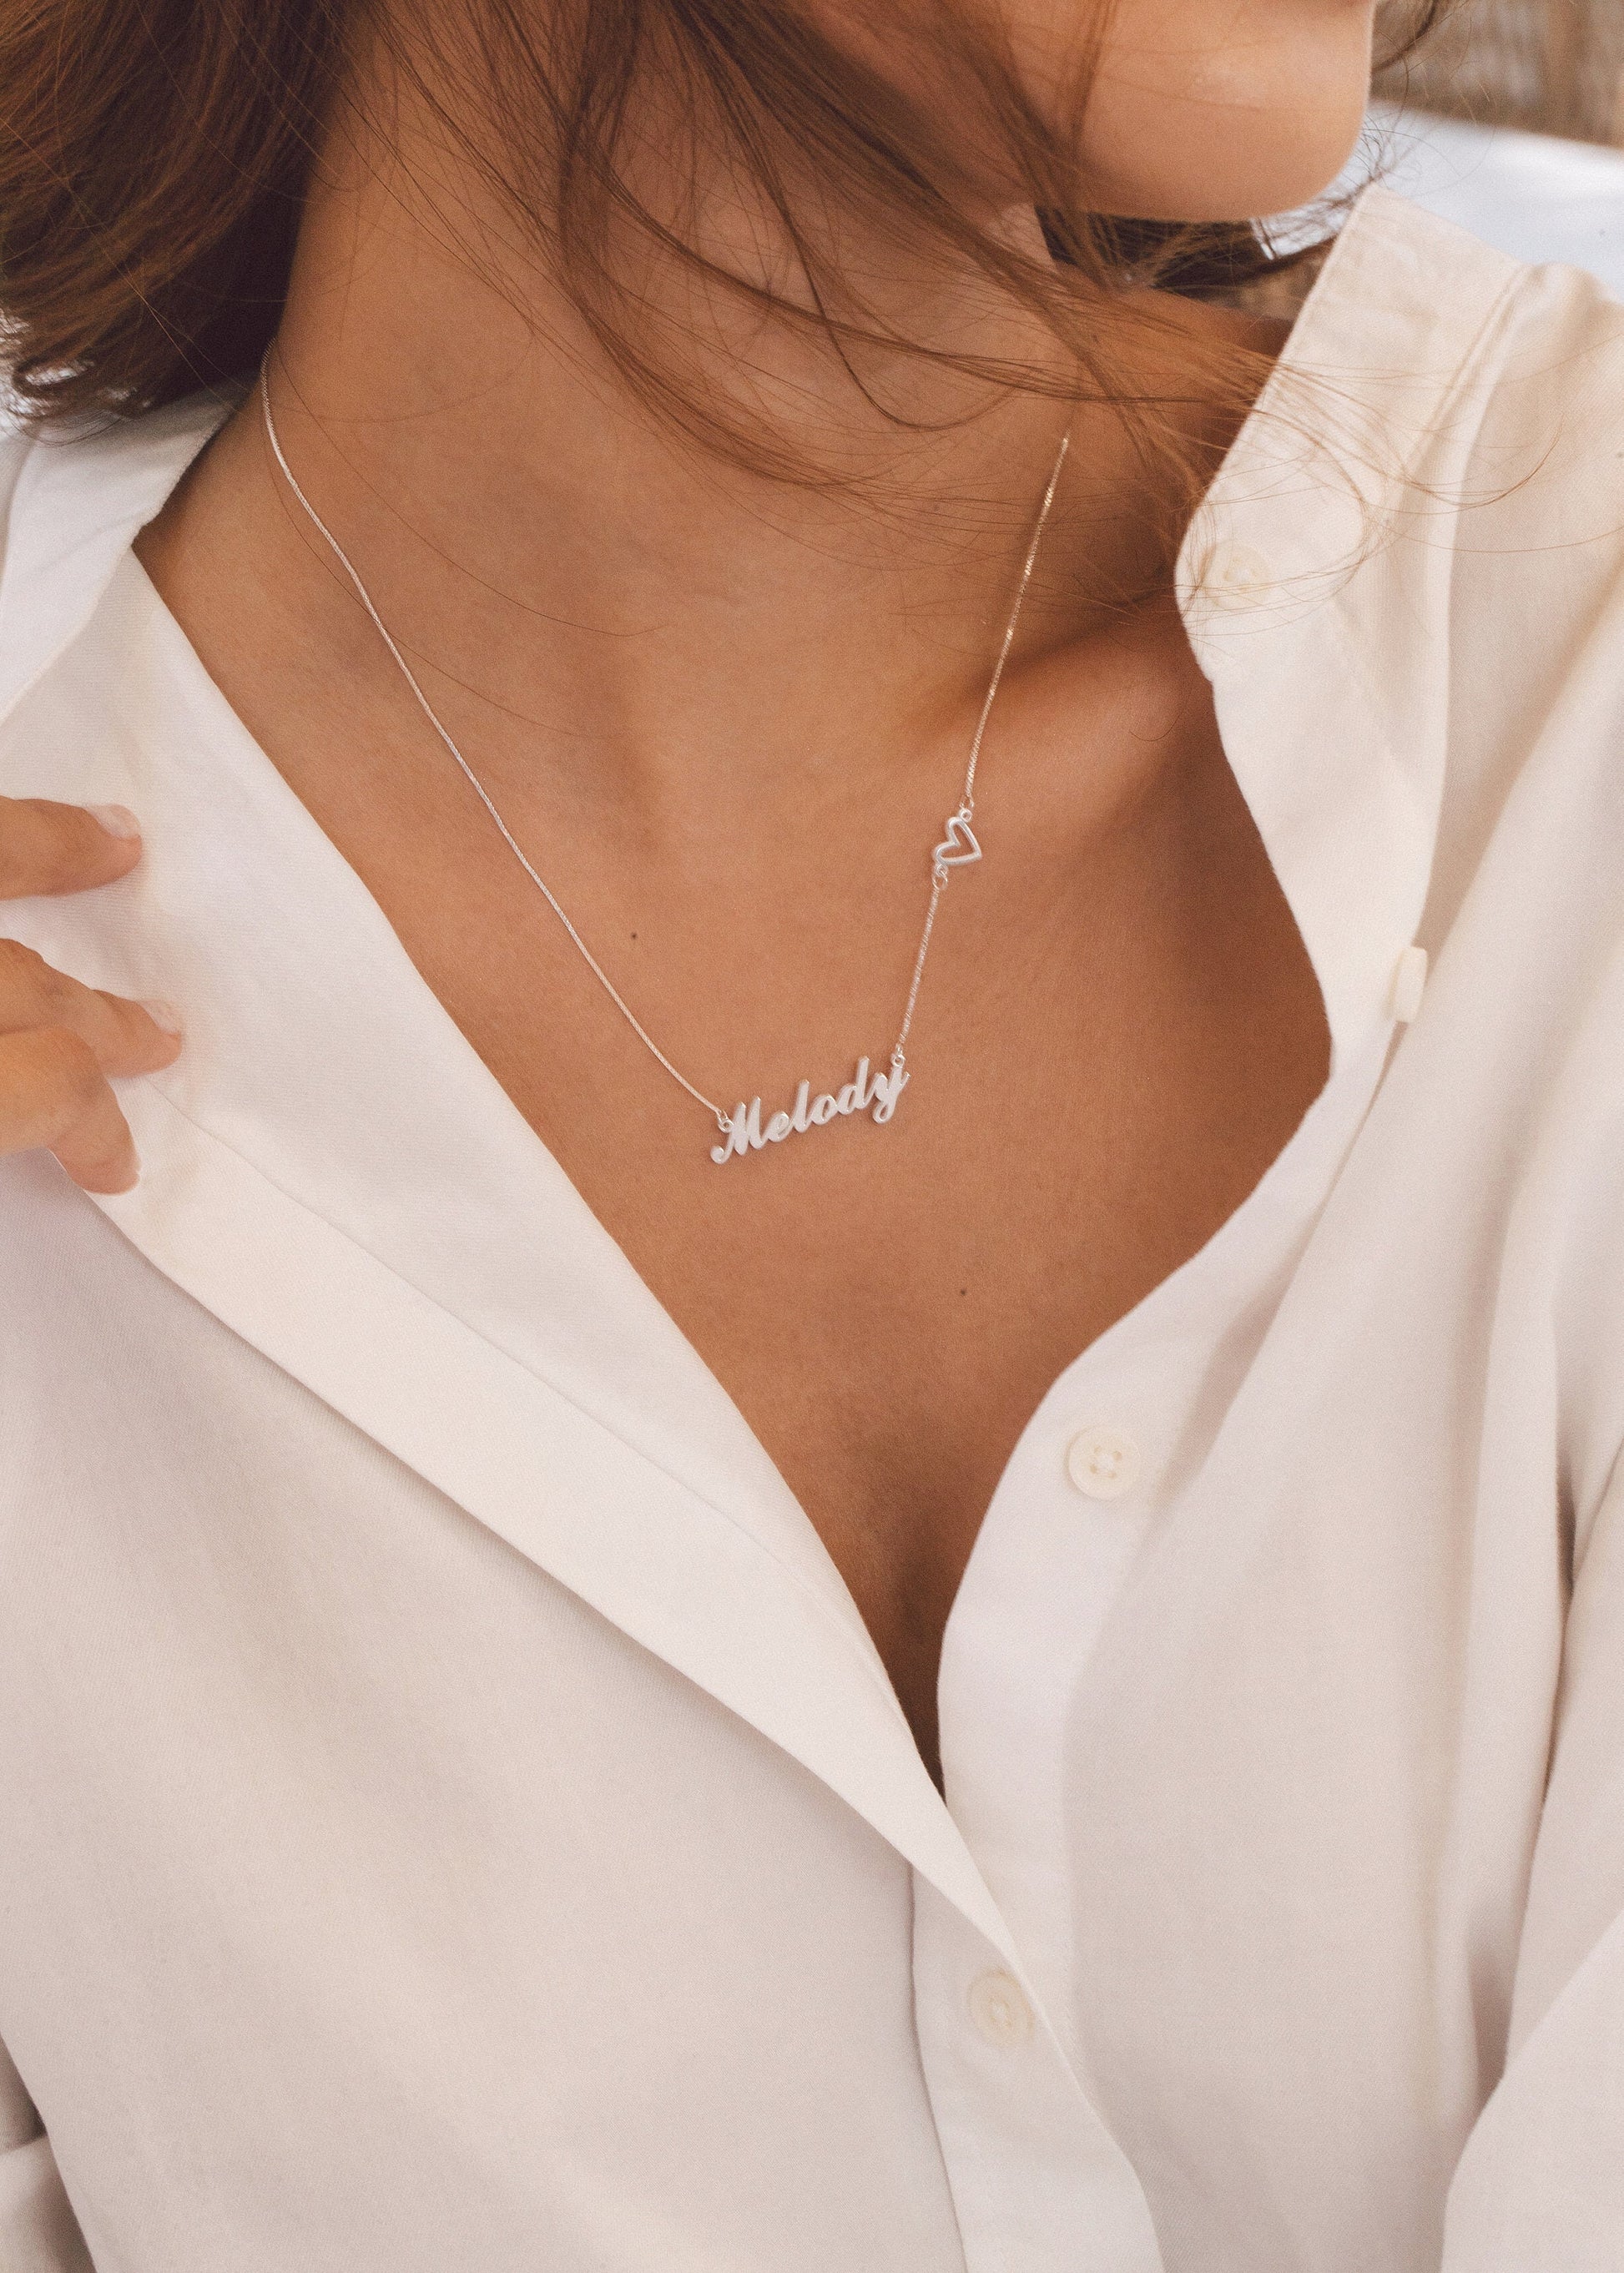 Name Jewelry | Dainty Name Necklace |  Personalized Name Necklace | Custom Name Necklace | Baby Name Necklace | Gift for Her | Gift for Mom